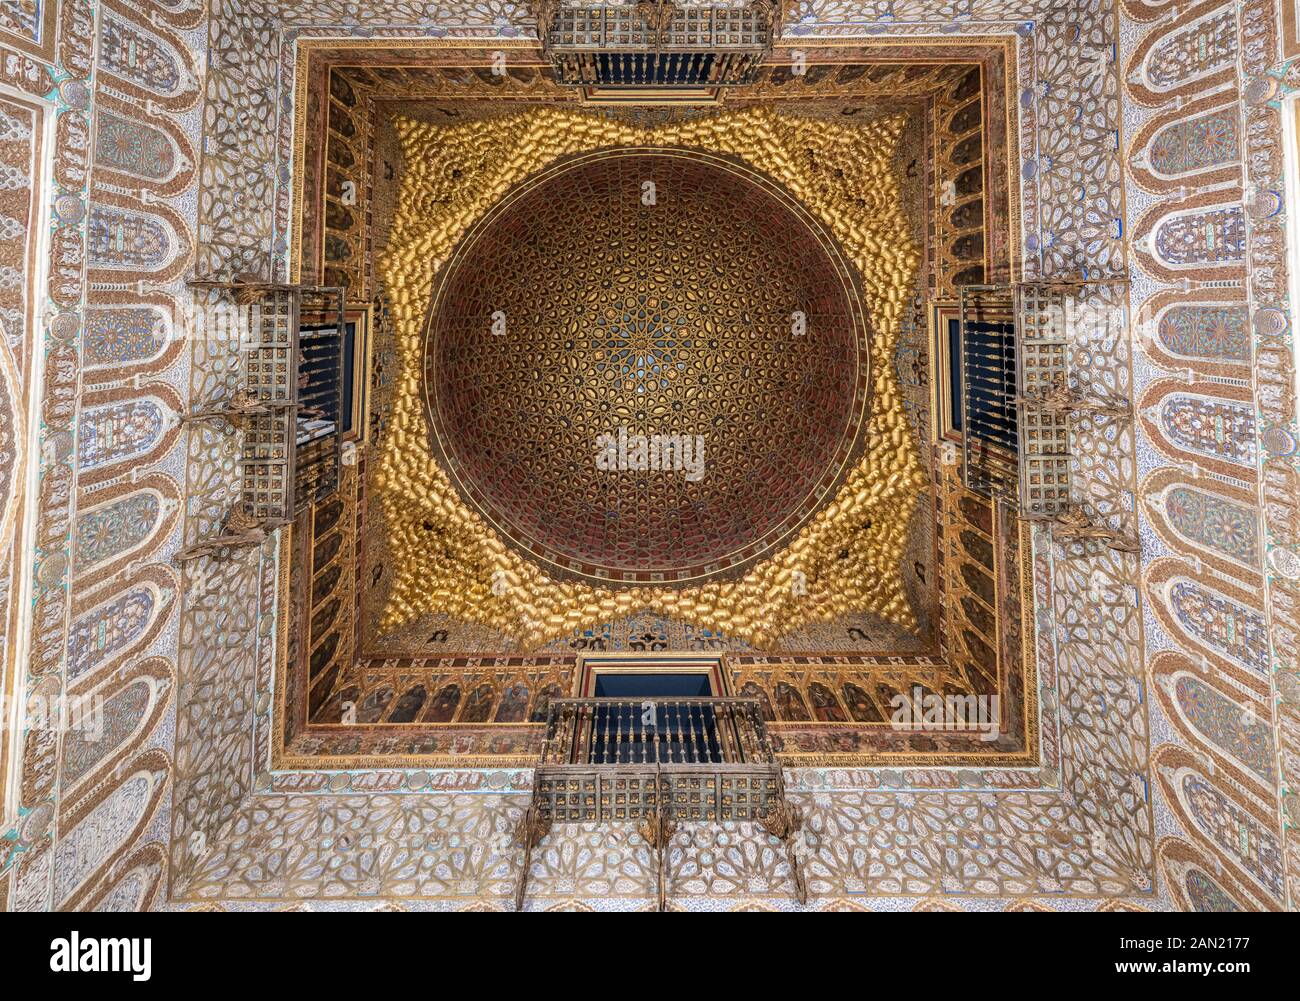 The stunning carved and gilded interlaced wooden dome in the Salón de los Embajadores of the Alcazar Palace's Palacio Del Rey Don Pedro. Stock Photo